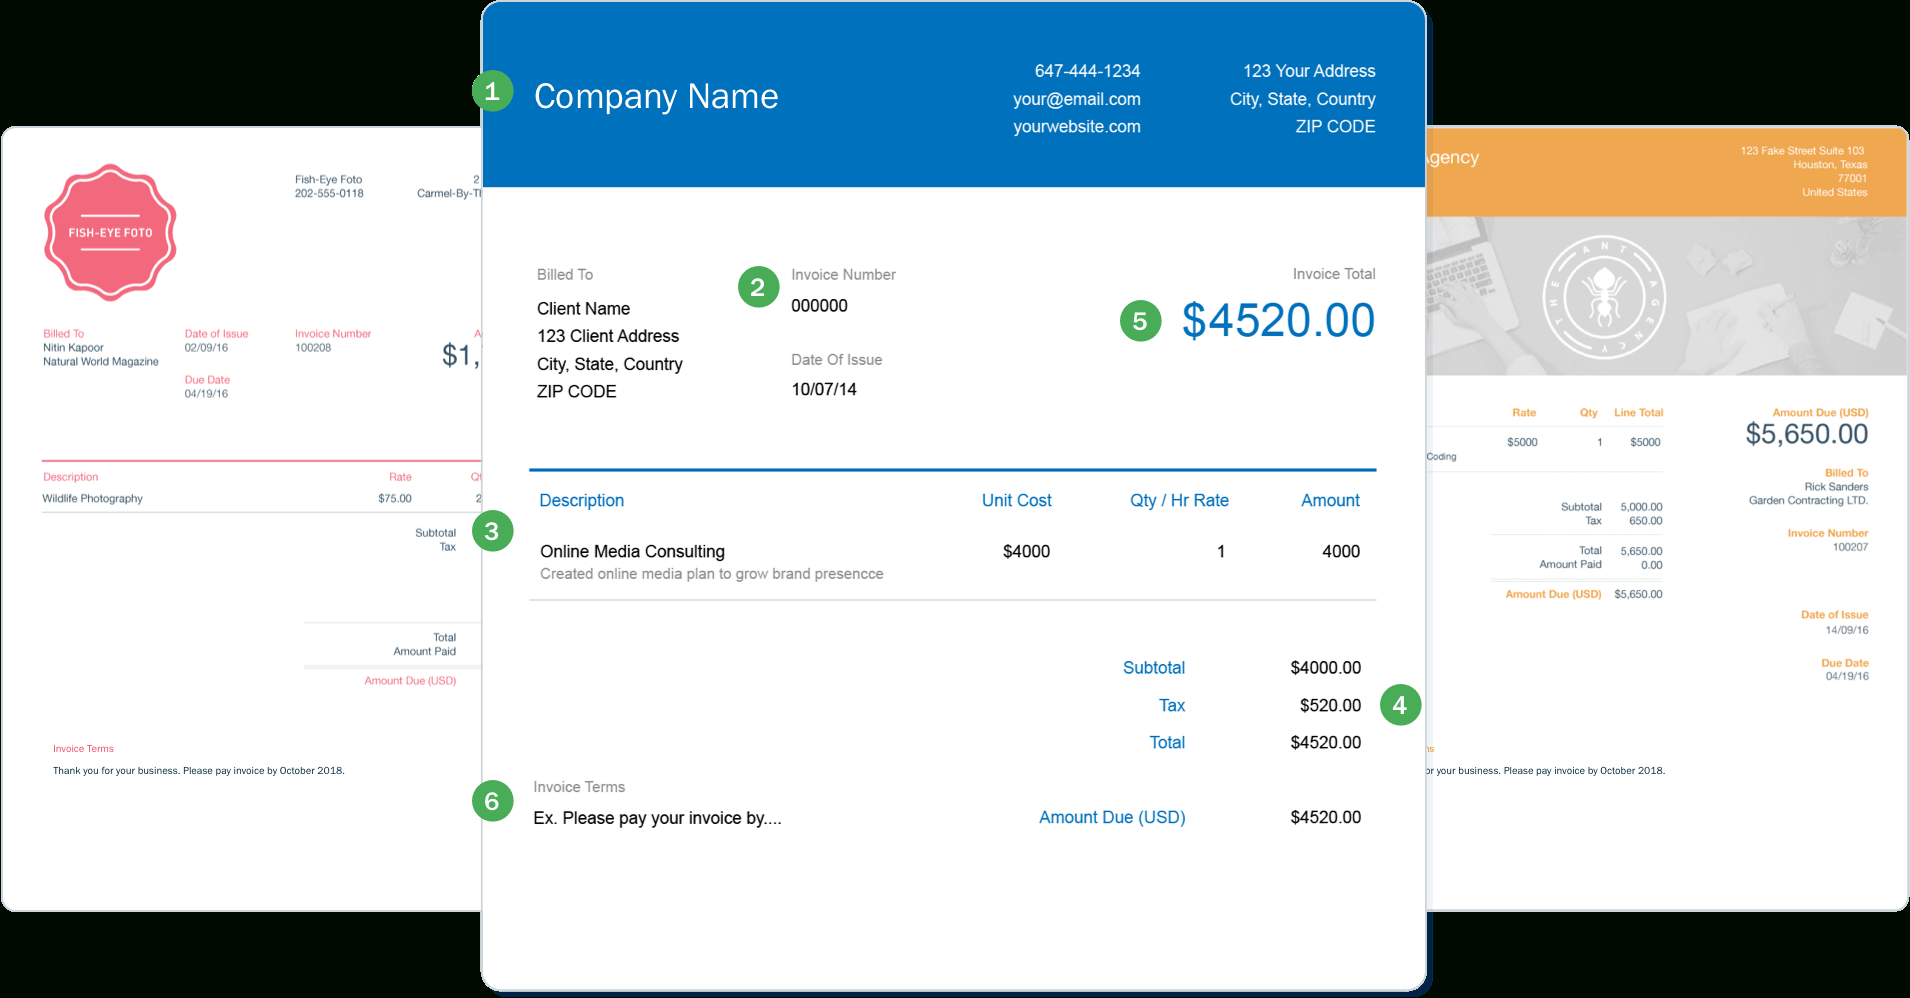 Invoice Template | Send In Minutes | Create Free Invoices Instantly - Free Invoices Online Printable